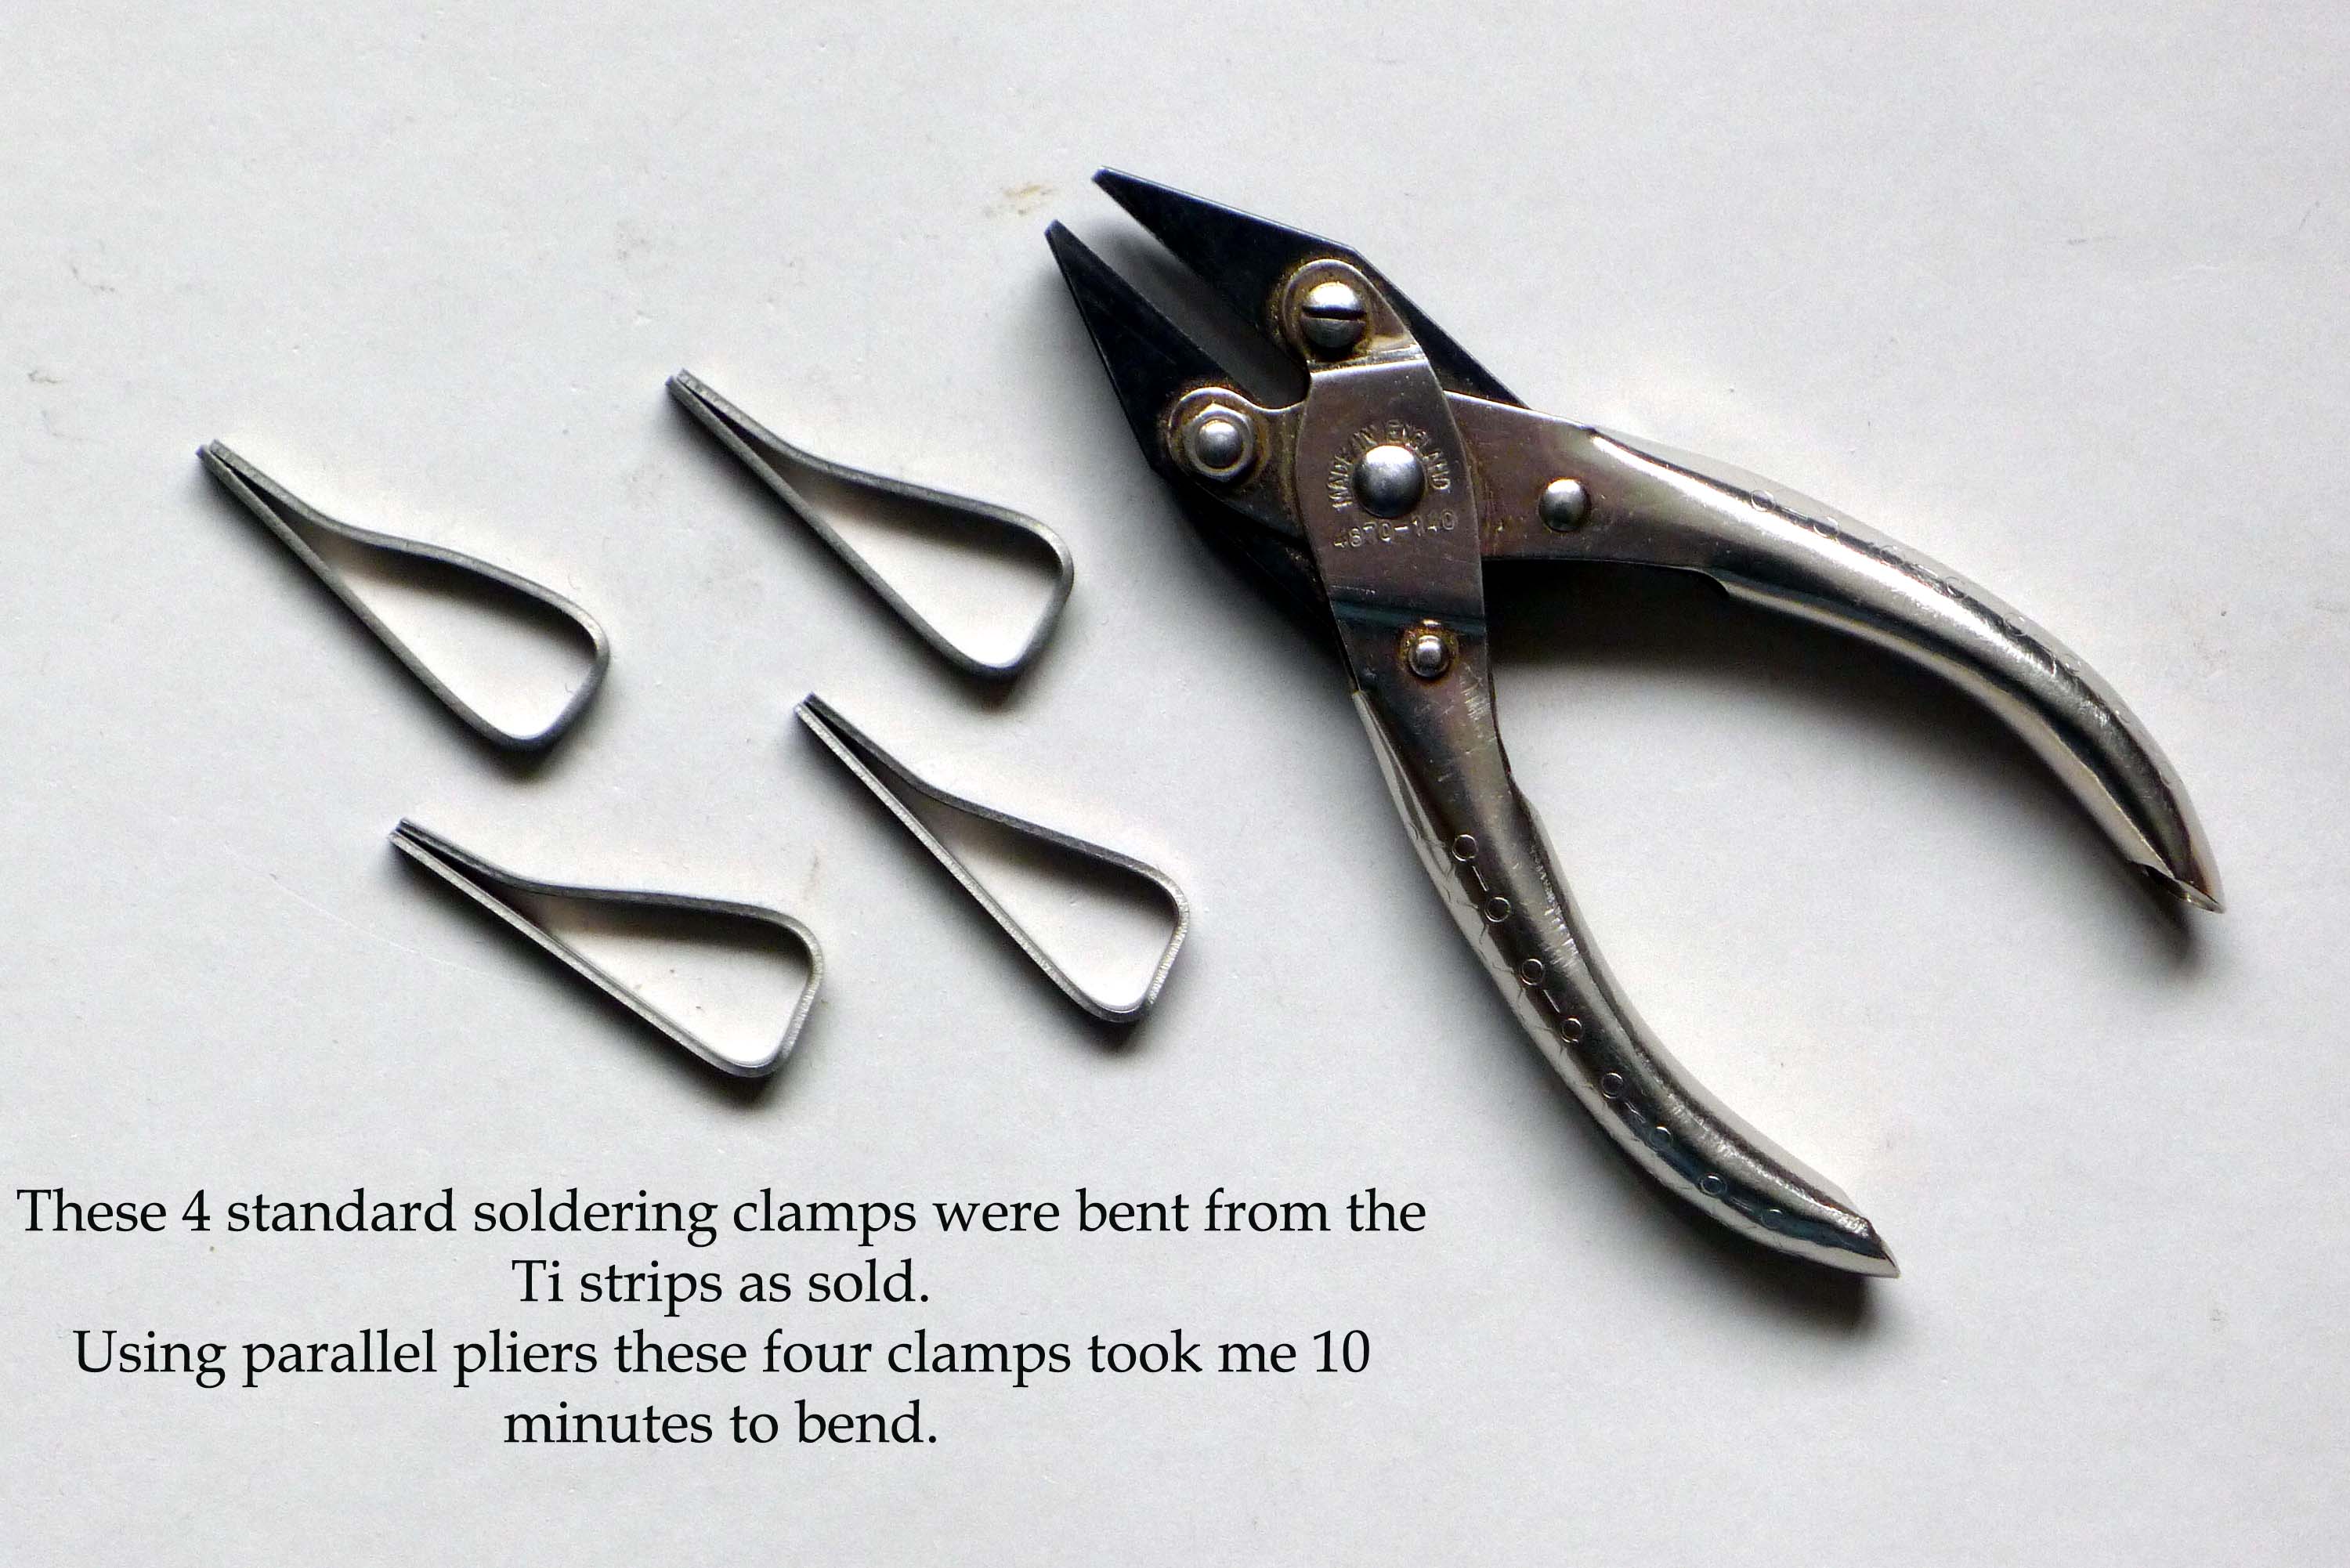 These are some shapes and uses of titanium soldering clamps